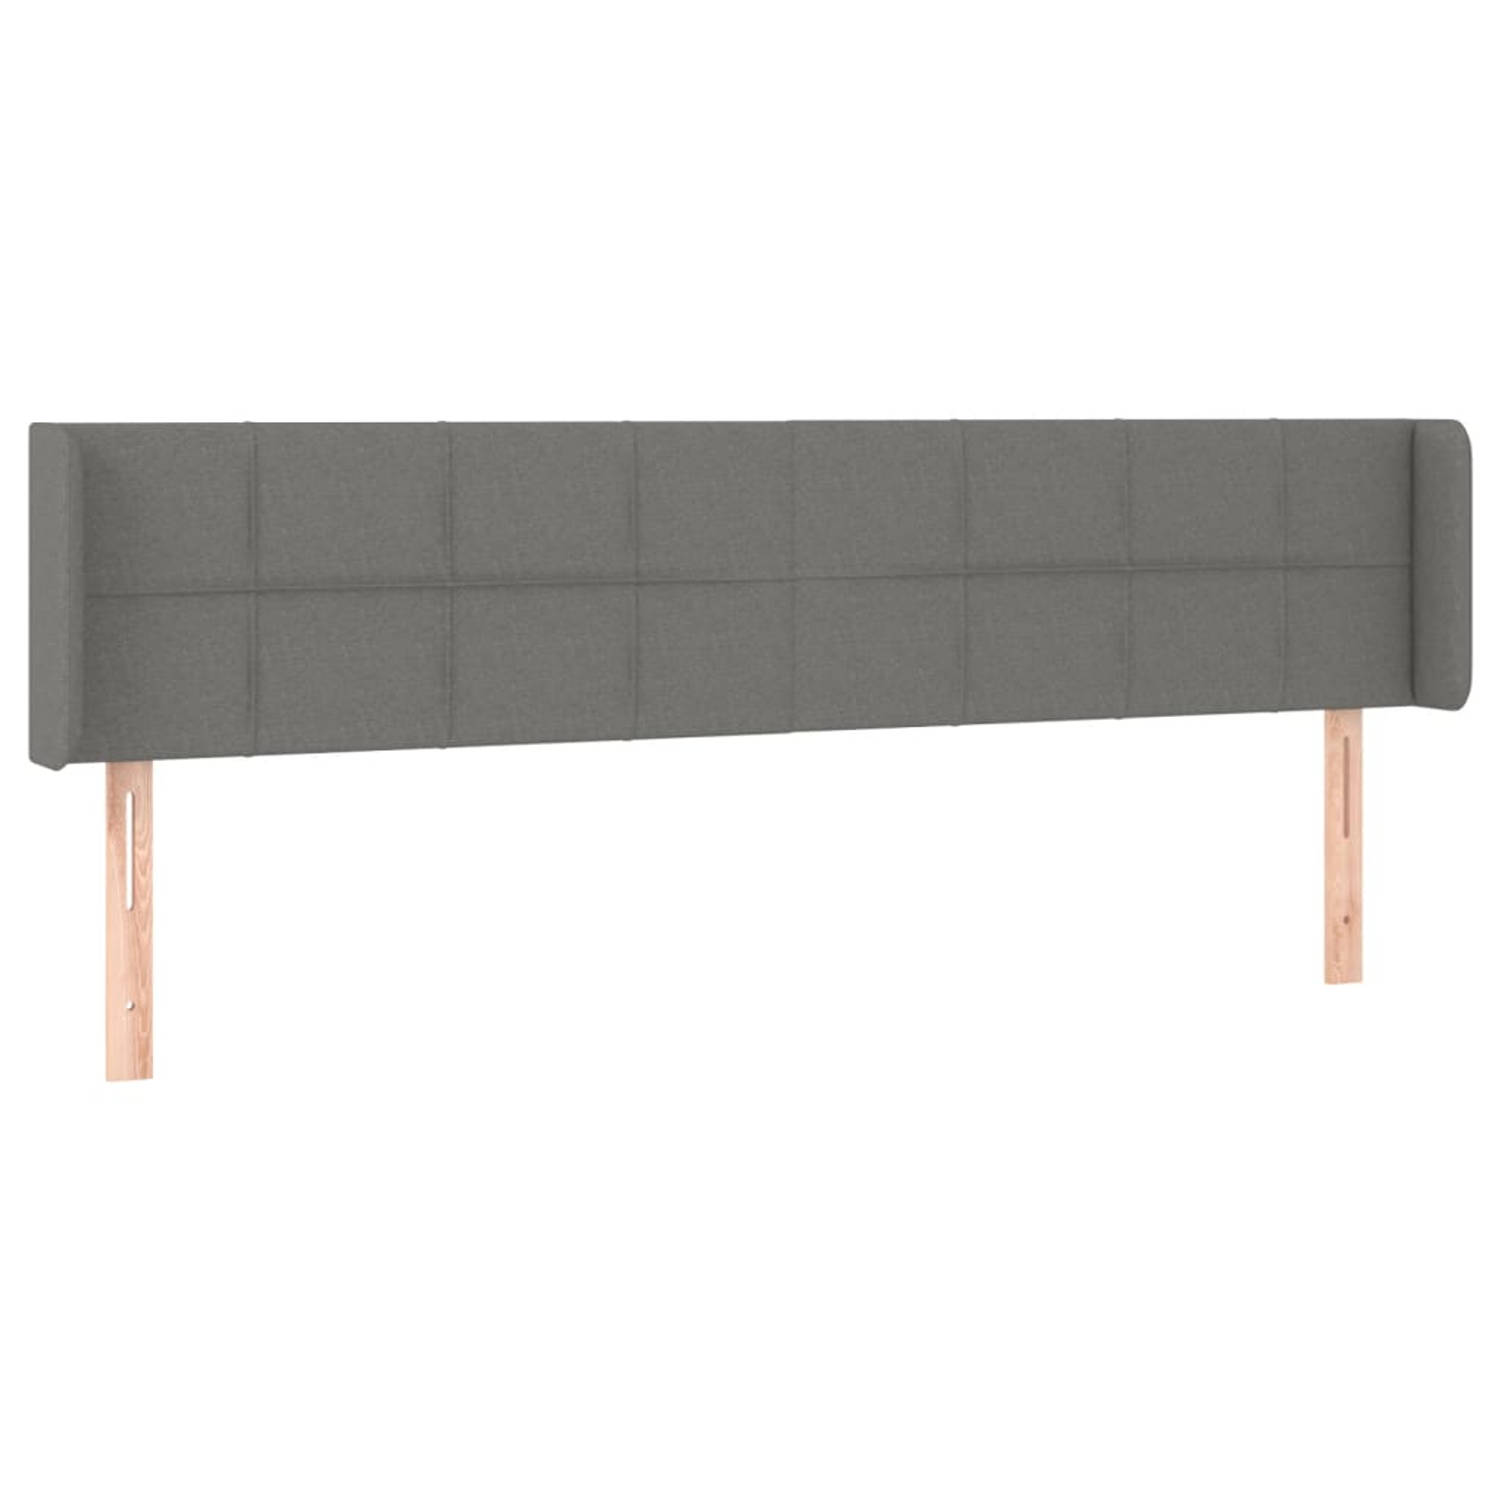 The Living Store Hoofdeind Bed - Donkergrijs - 203 x 16 x 78/88 cm - Stof - hout